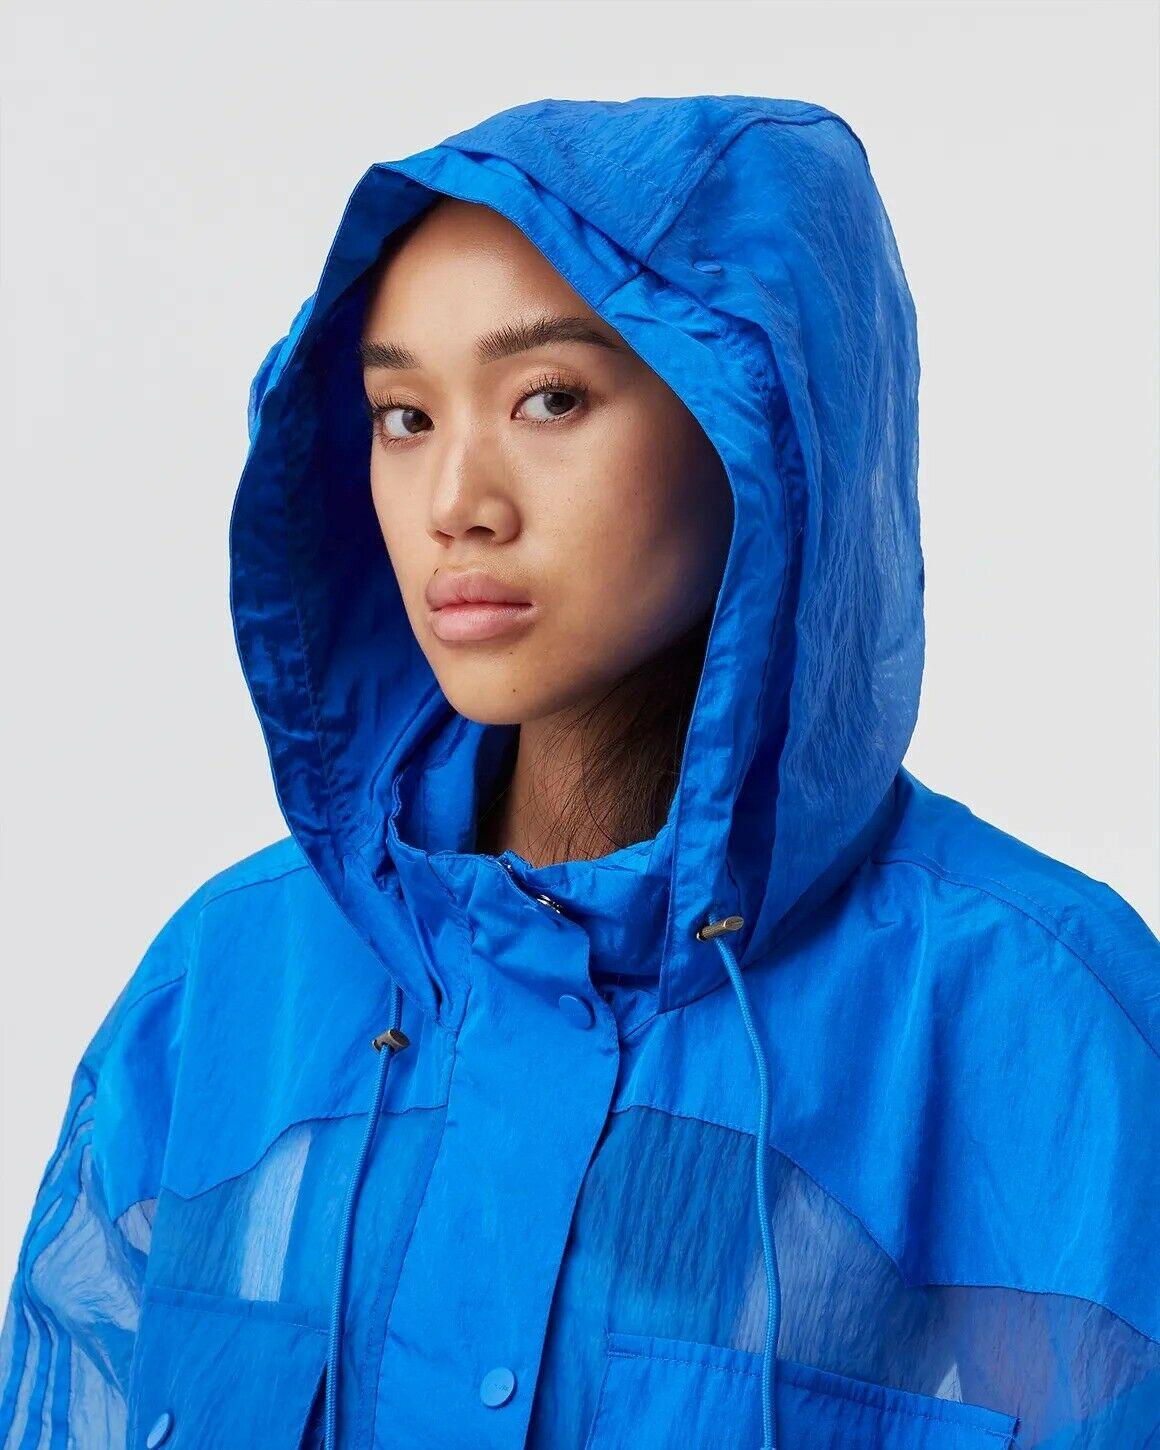 ADIDAS X IVY PARK COVERUP JACKET Glory Glow Blue Rodeo Collection Size M - SVNYFancy